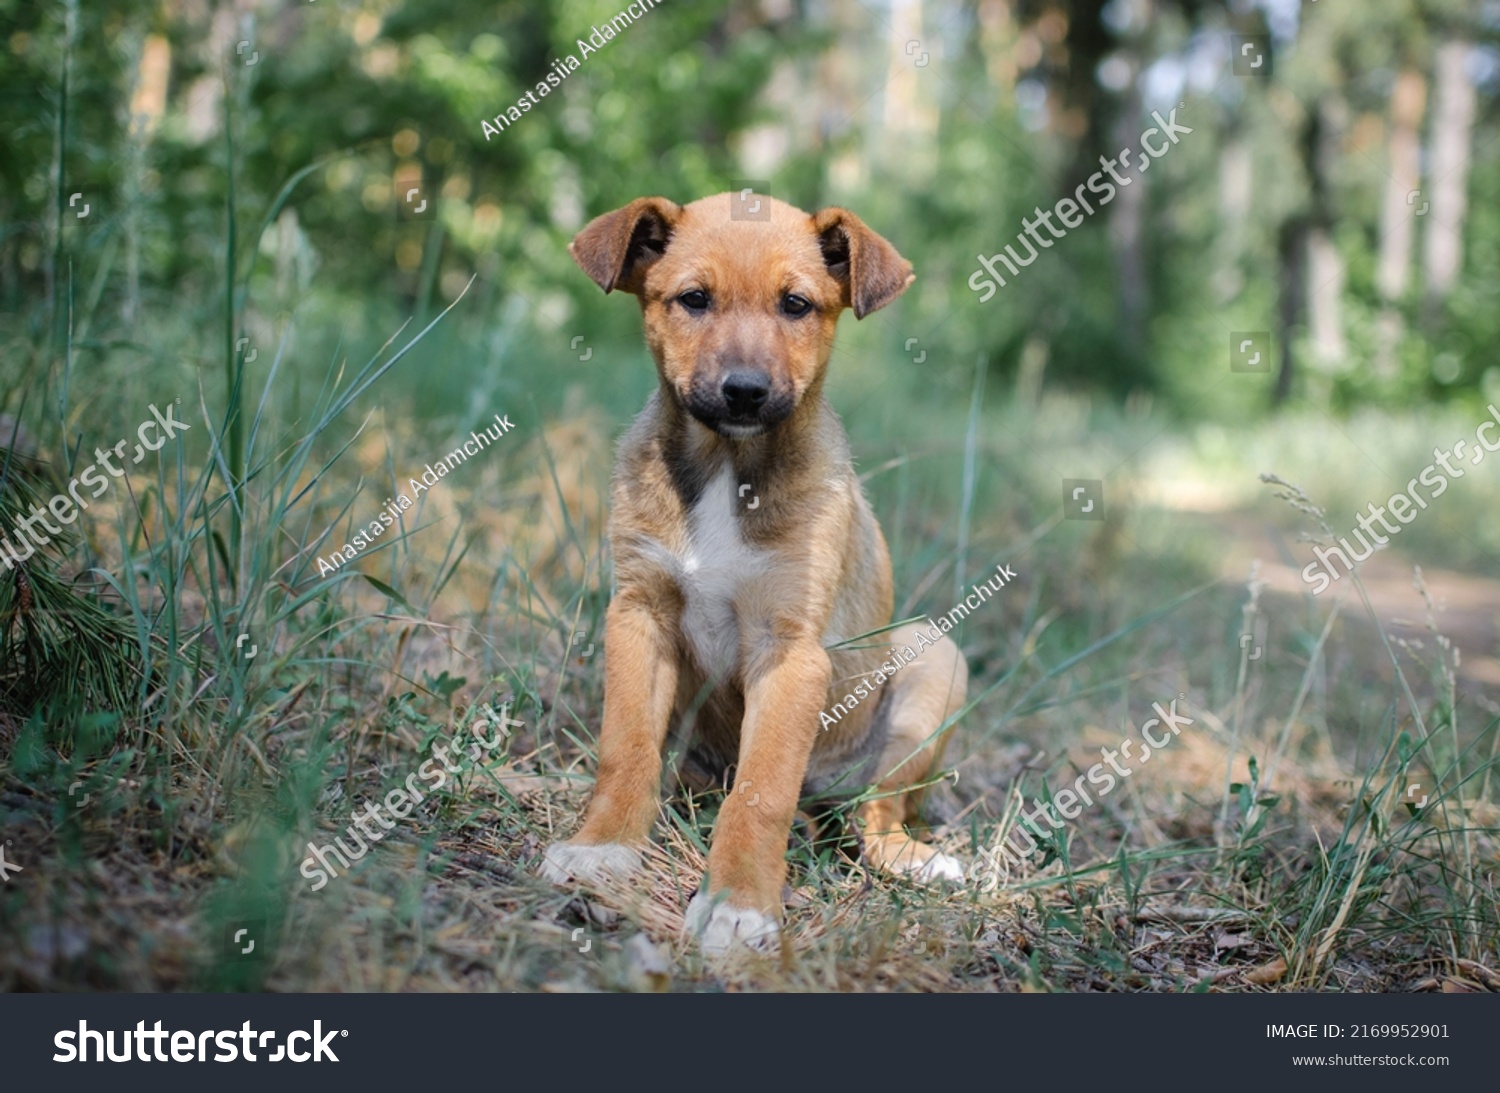 Cute red mix breed puppy in grass. Outbred dog in summer forest #2169952901